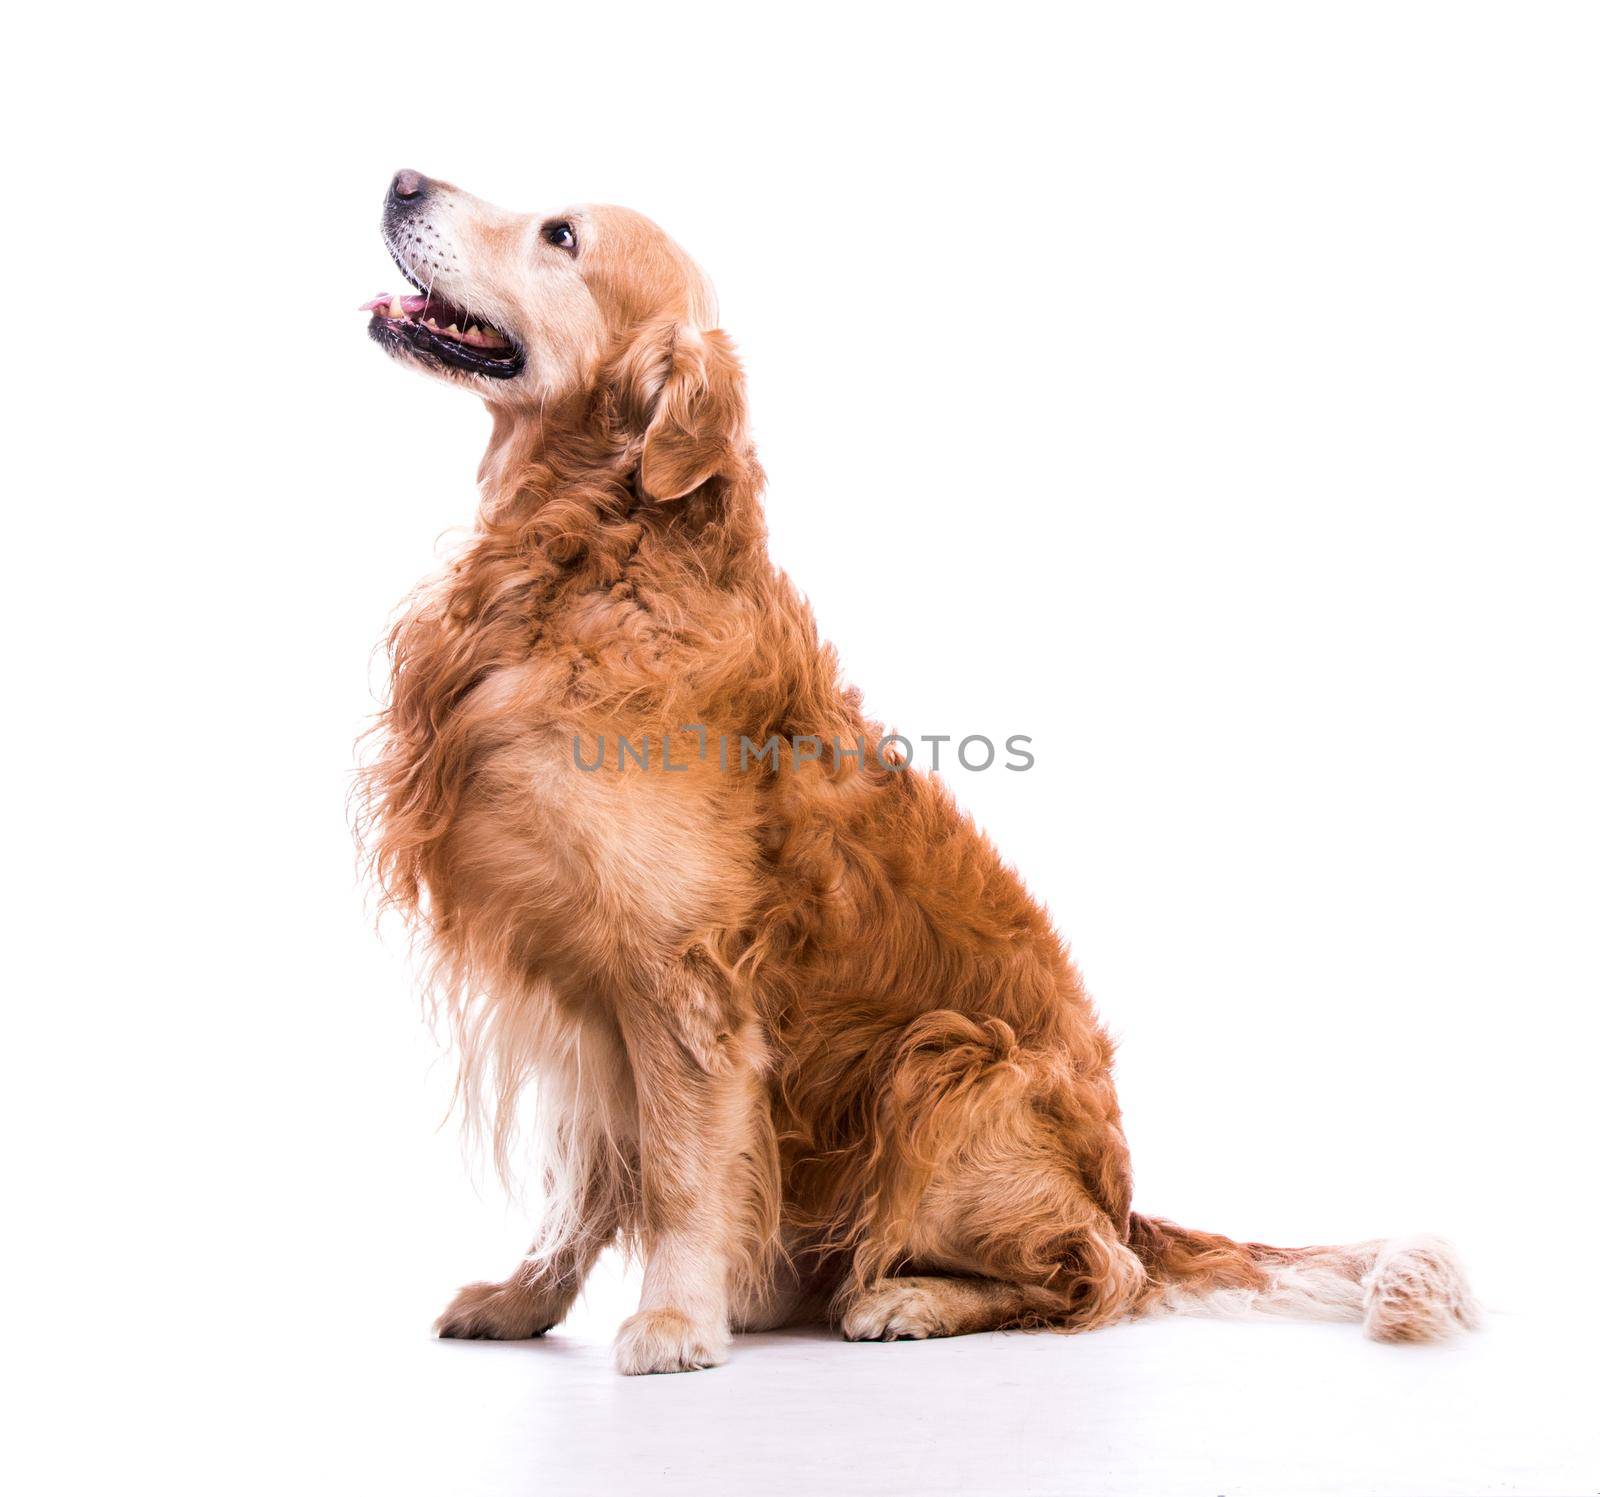 Beautiful dog sitting down - isolated over a white background